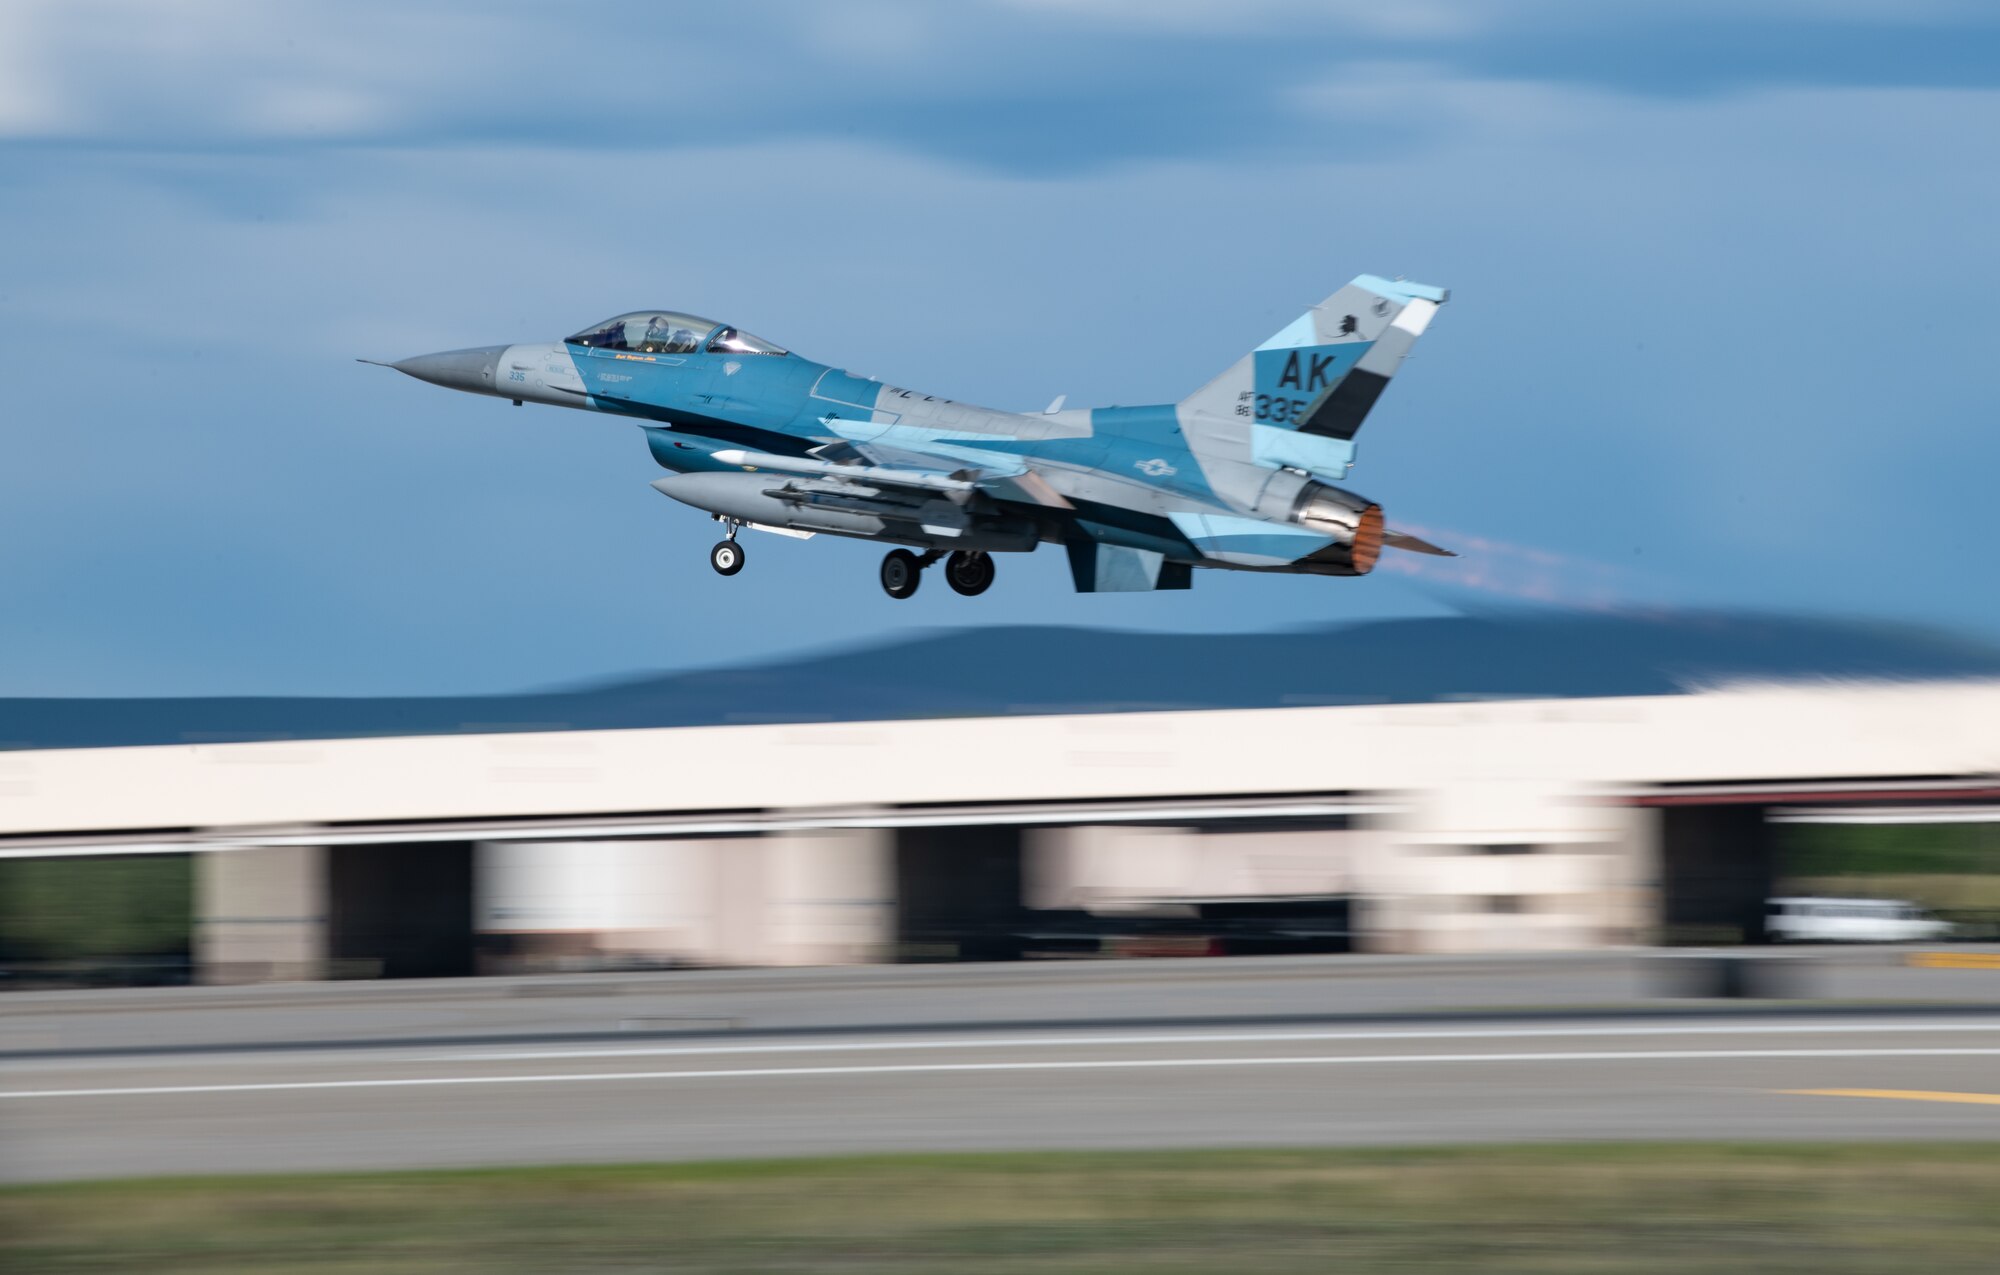 A U.S. Air Force F-16C Fighting Falcon assigned to the 18th Aggressor Squadron takes off during Northern Edge, May 20, 2019, from Eielson Air Force Base, Alaska. Northern Edge is designed to sharpen participants’ tactical combat skills, to improve command, control and communication relationships and to develop plans and programs across the Joint Force. (U.S. Air Force photo by Staff Sgt. Micaiah Anthony)